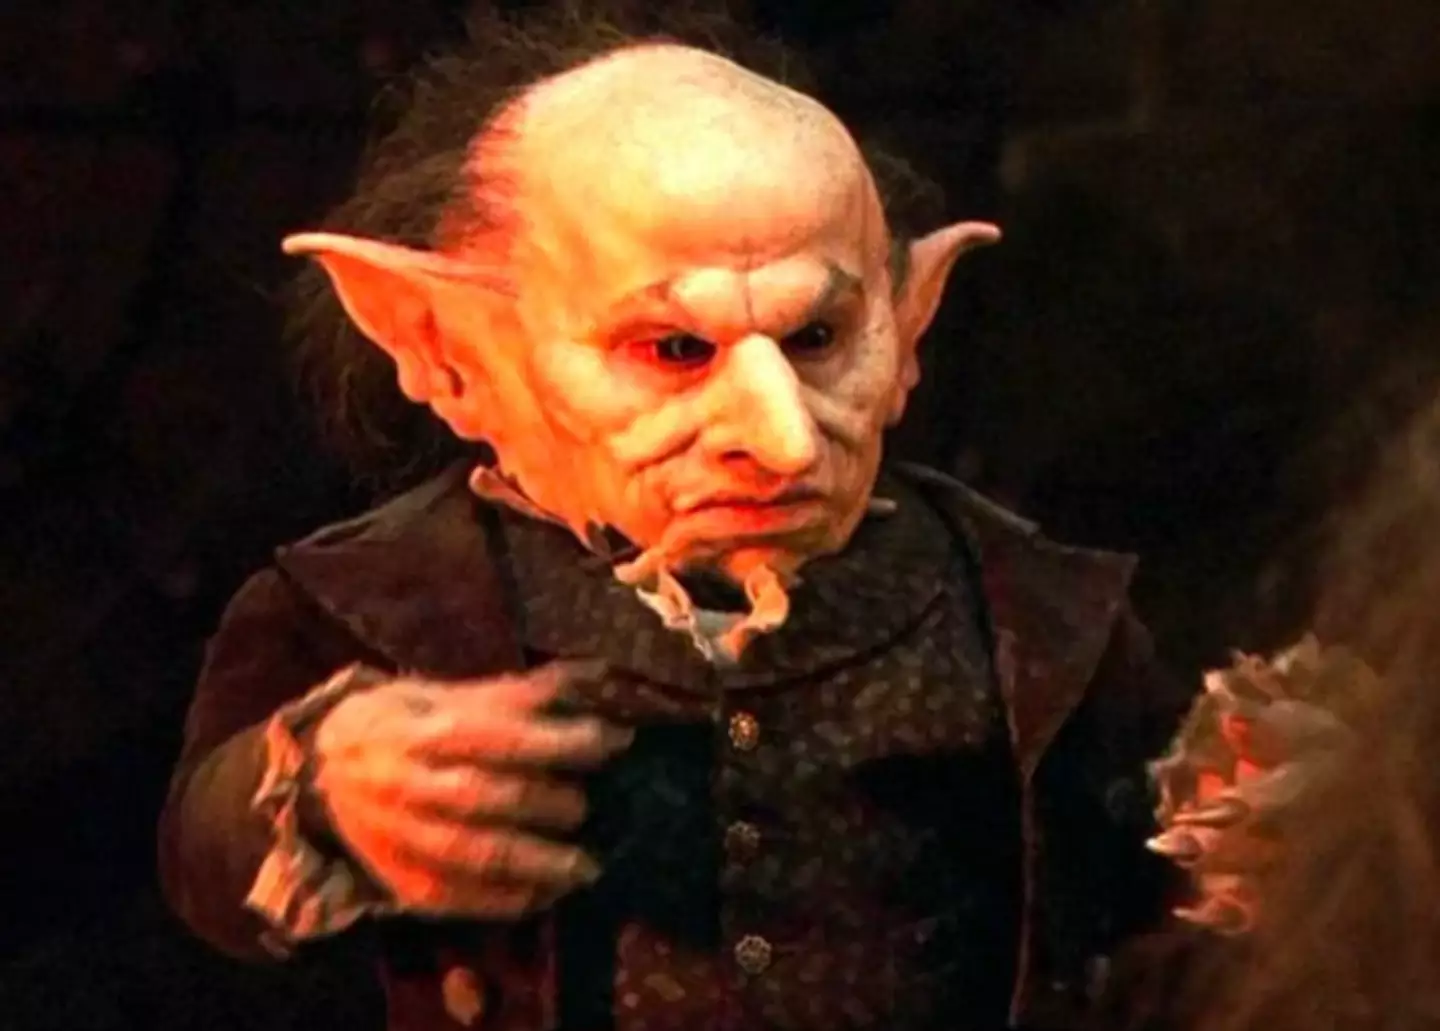 Warwick Davis later took over the role of the goblin. (Warner Bros)